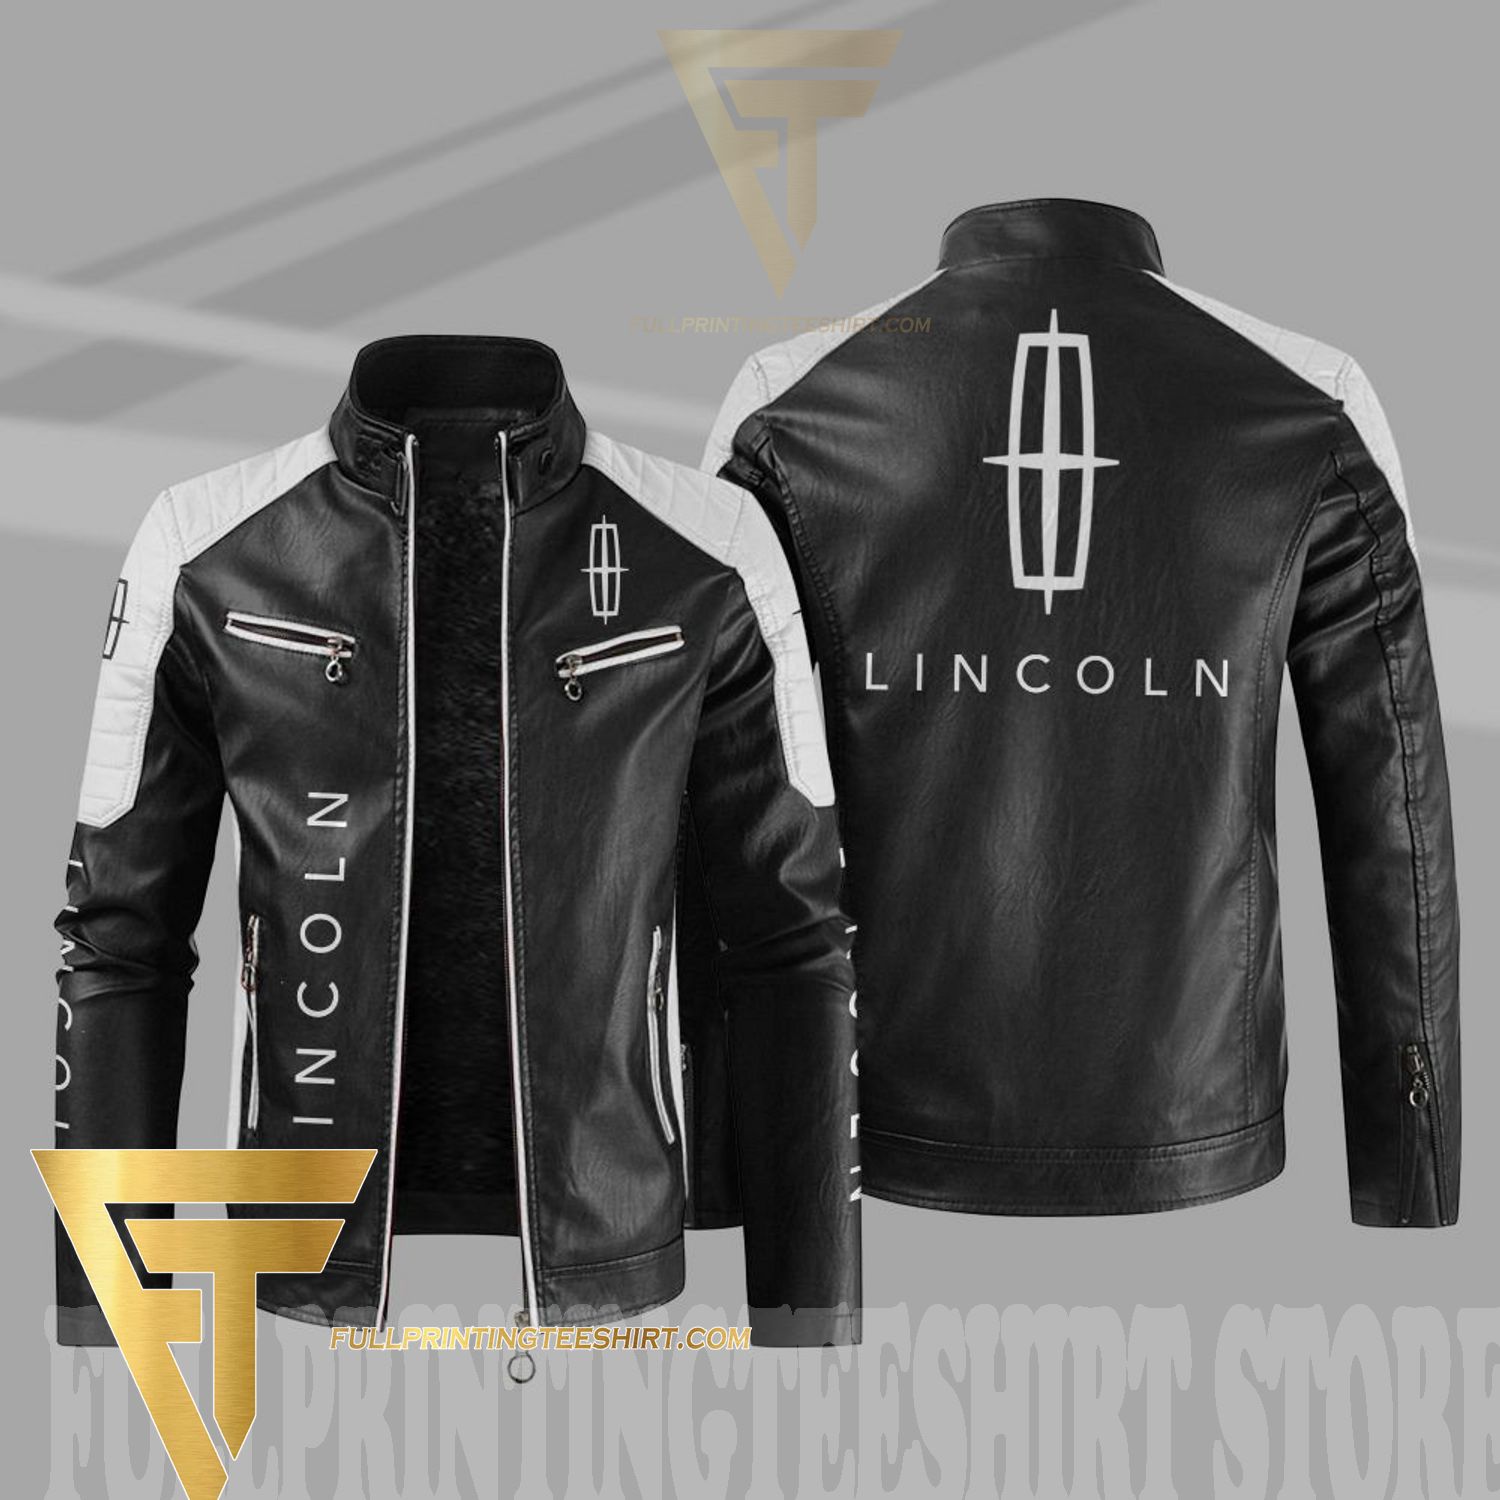 Top-selling item] Car Print Jacket All Symbol Lincoln Over